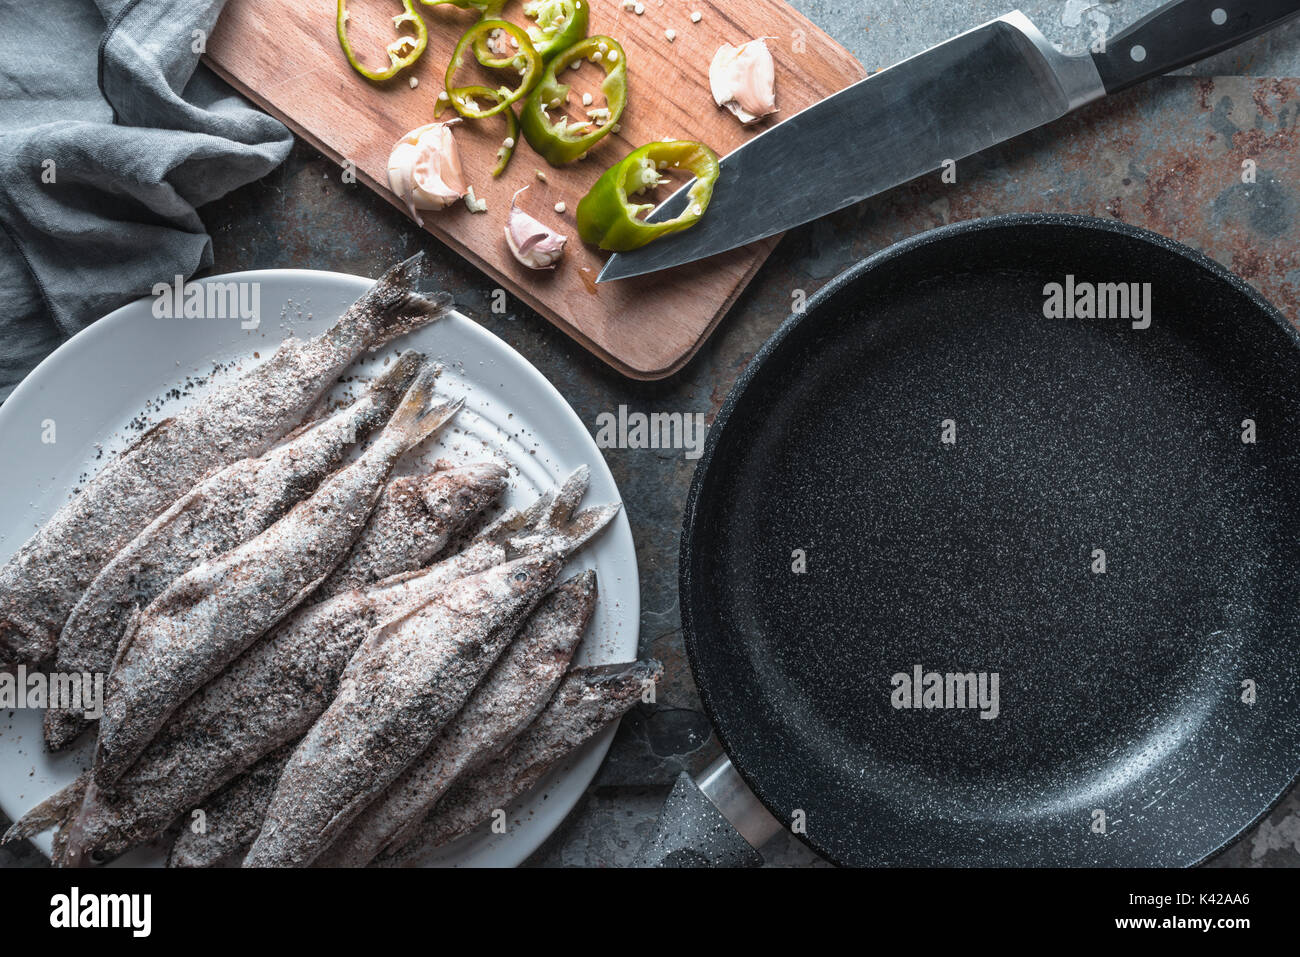 Chili and garlic, smelt on a plate and frying pan horizontal Stock Photo